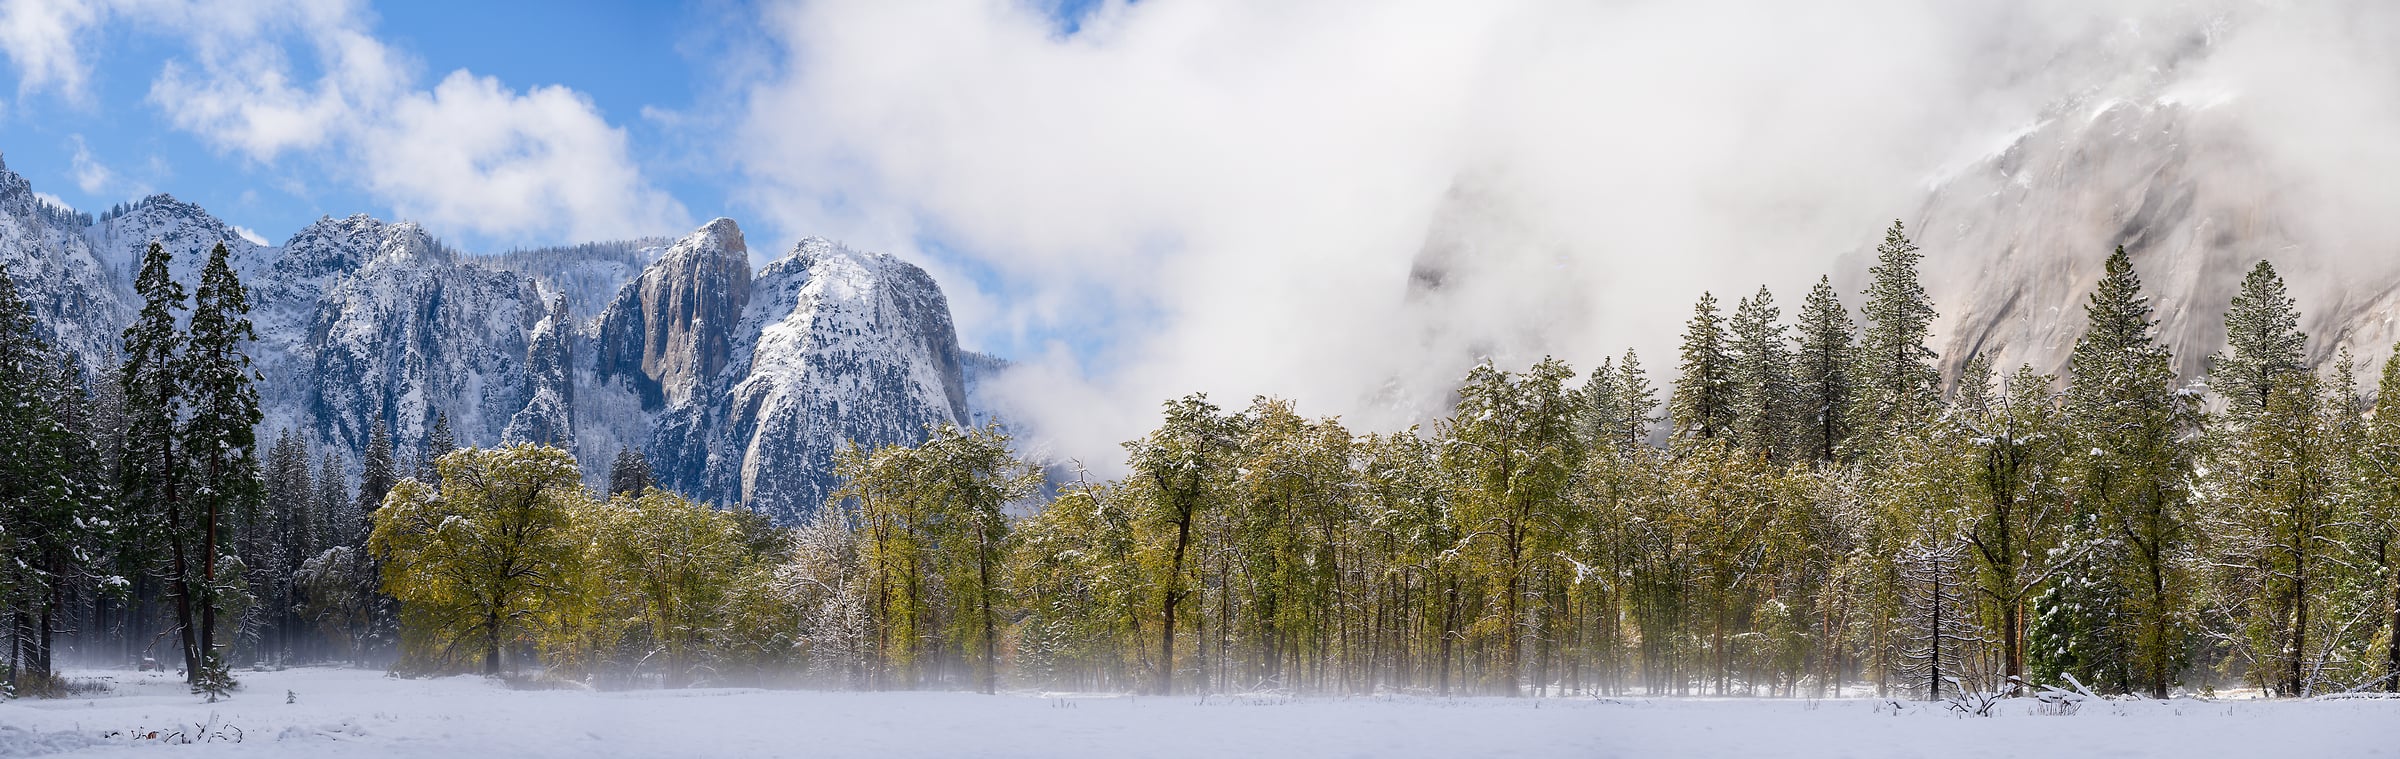 267 megapixels! A very high resolution, large-format VAST photo print of a beautiful winter scene with a snow-covered field, trees, and mountains in the background; panorama photograph created by Jeff Lewis in Yosemite National Park, California.